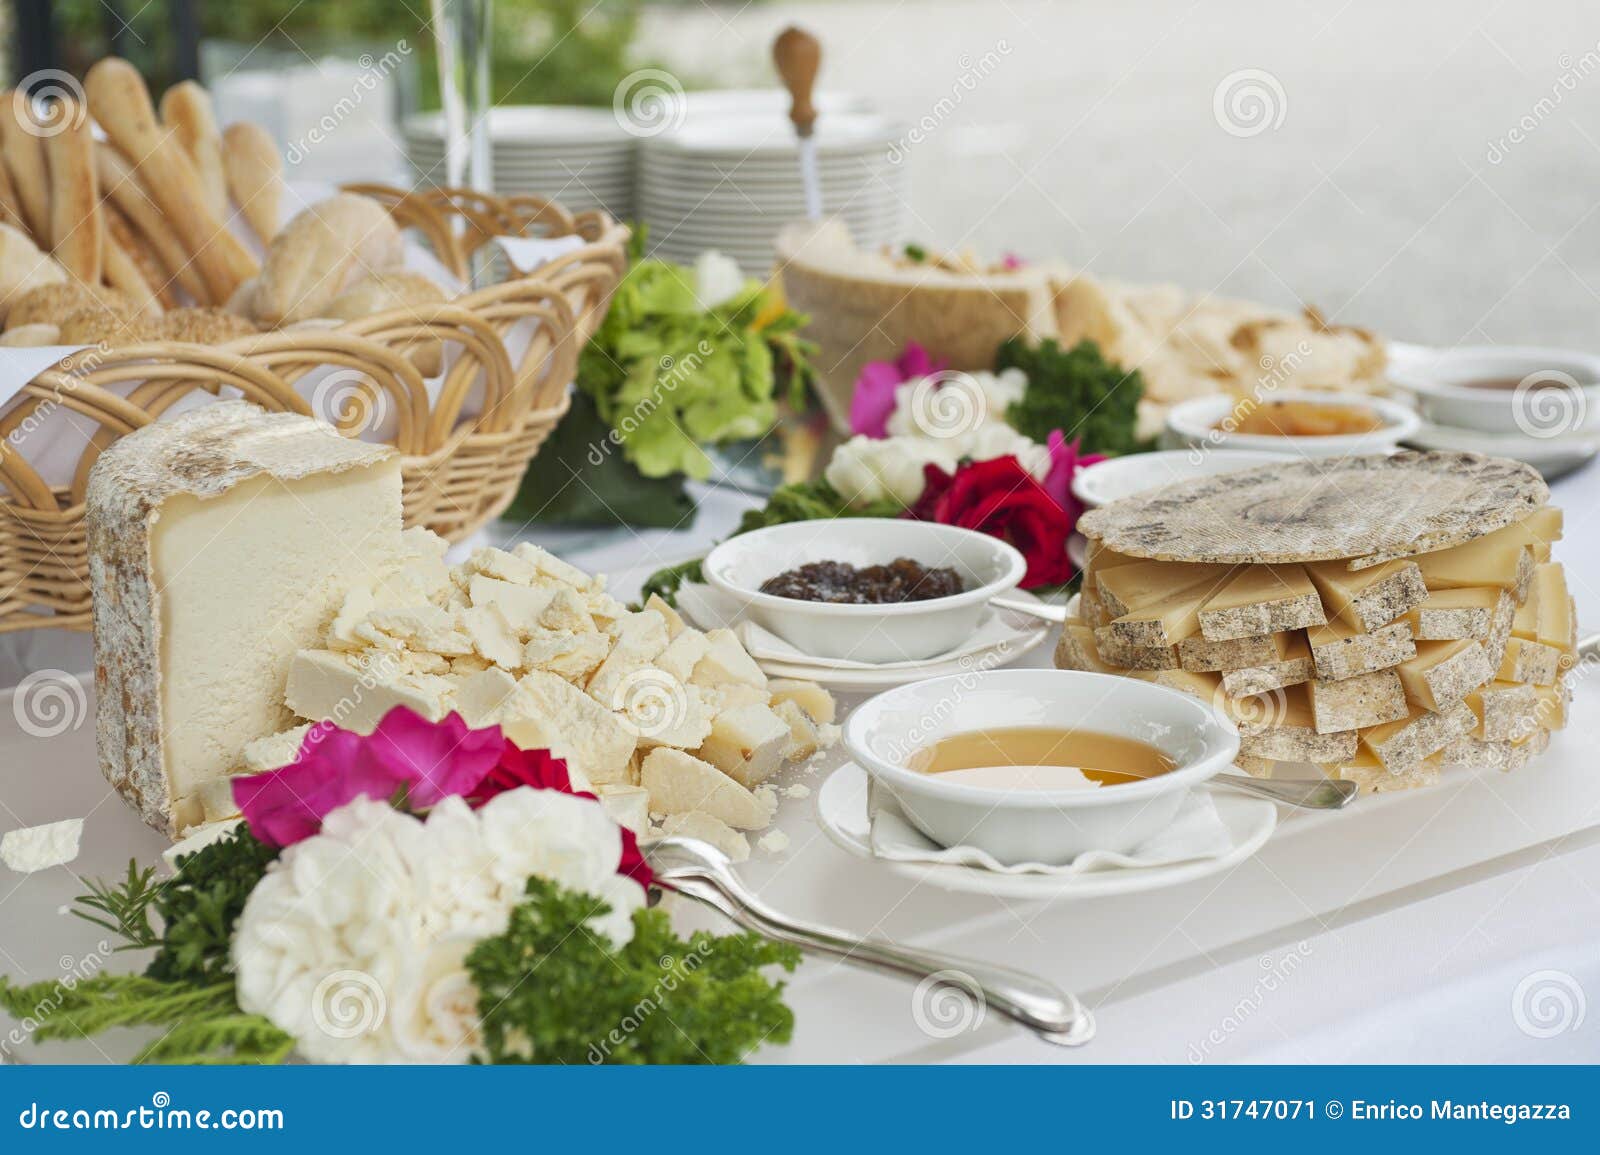 Buffet table with cheese, honey and jam.